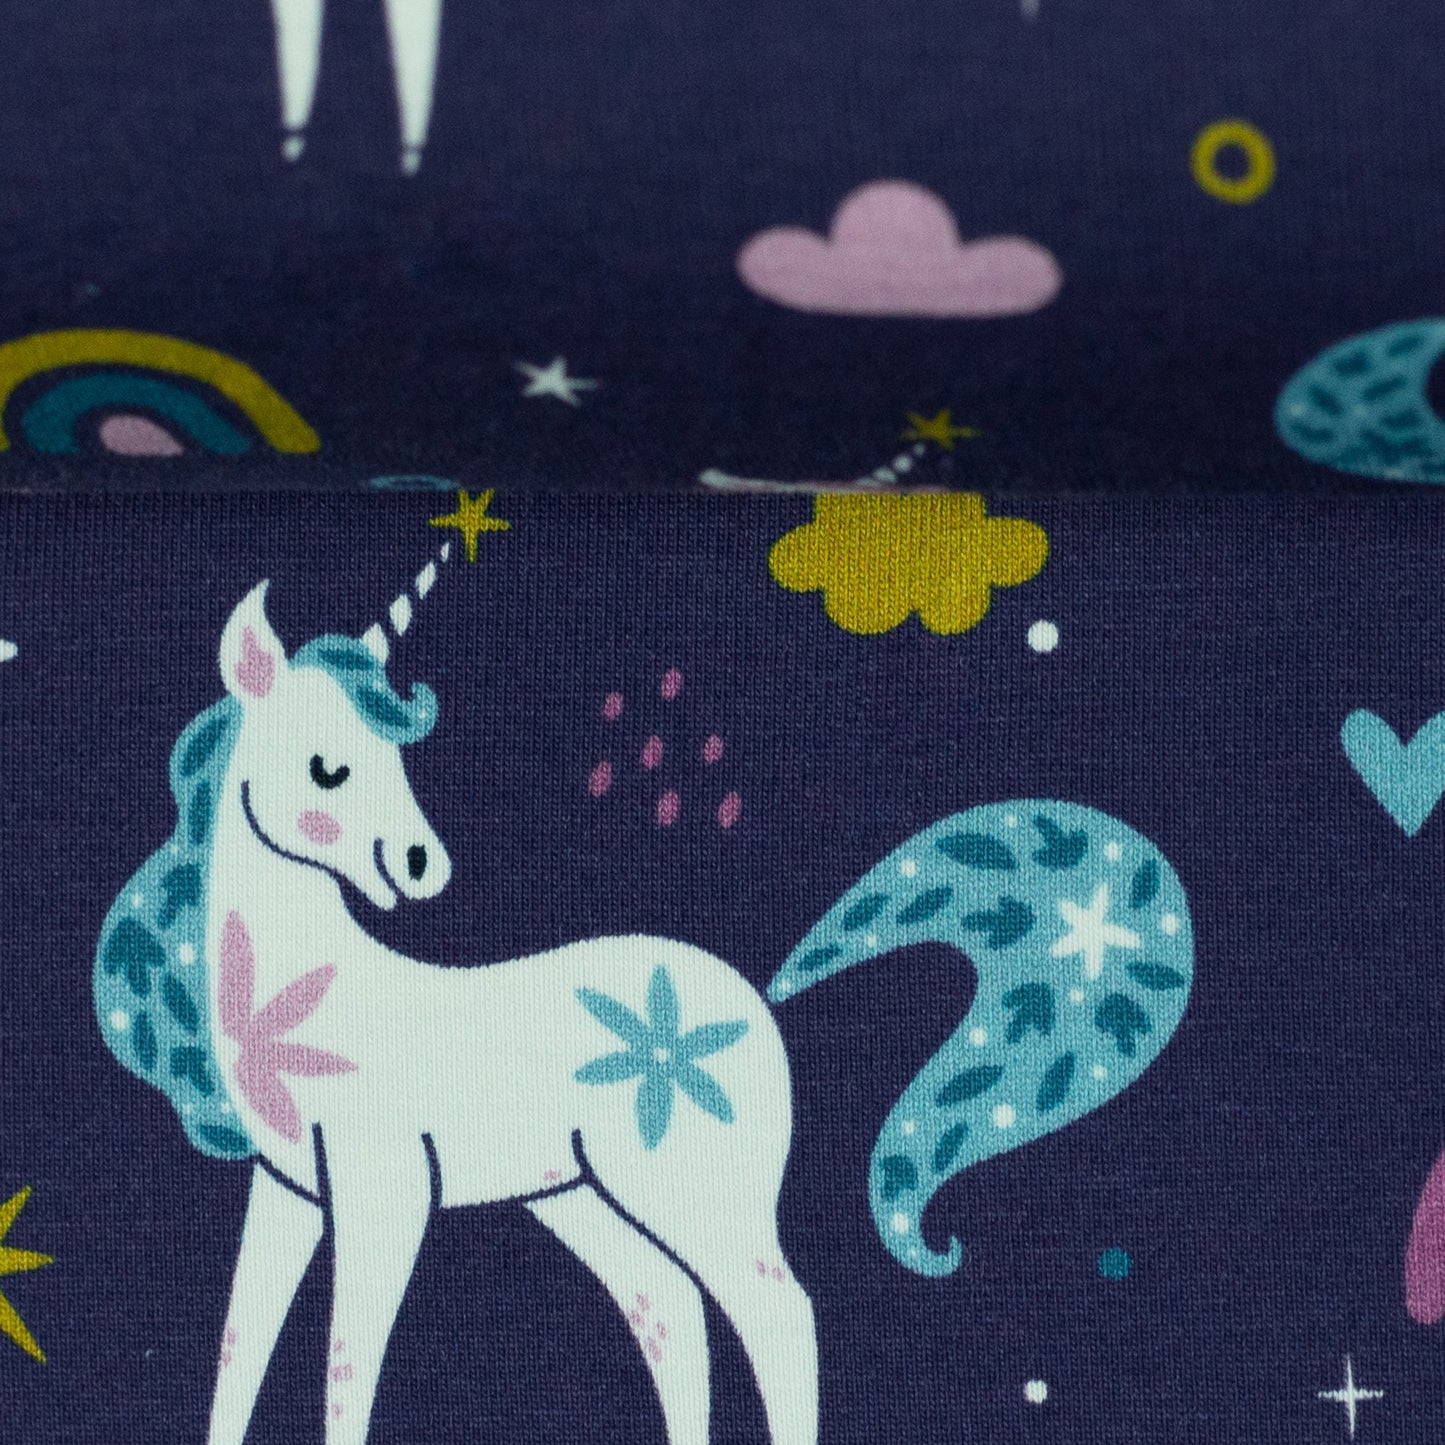 Coming Soon - Swafing Prints - Unicorns on Dark Blue - 220 gsm Jersey - Expected to Stock Week of April 28th - Little Rhody Sewing Co.